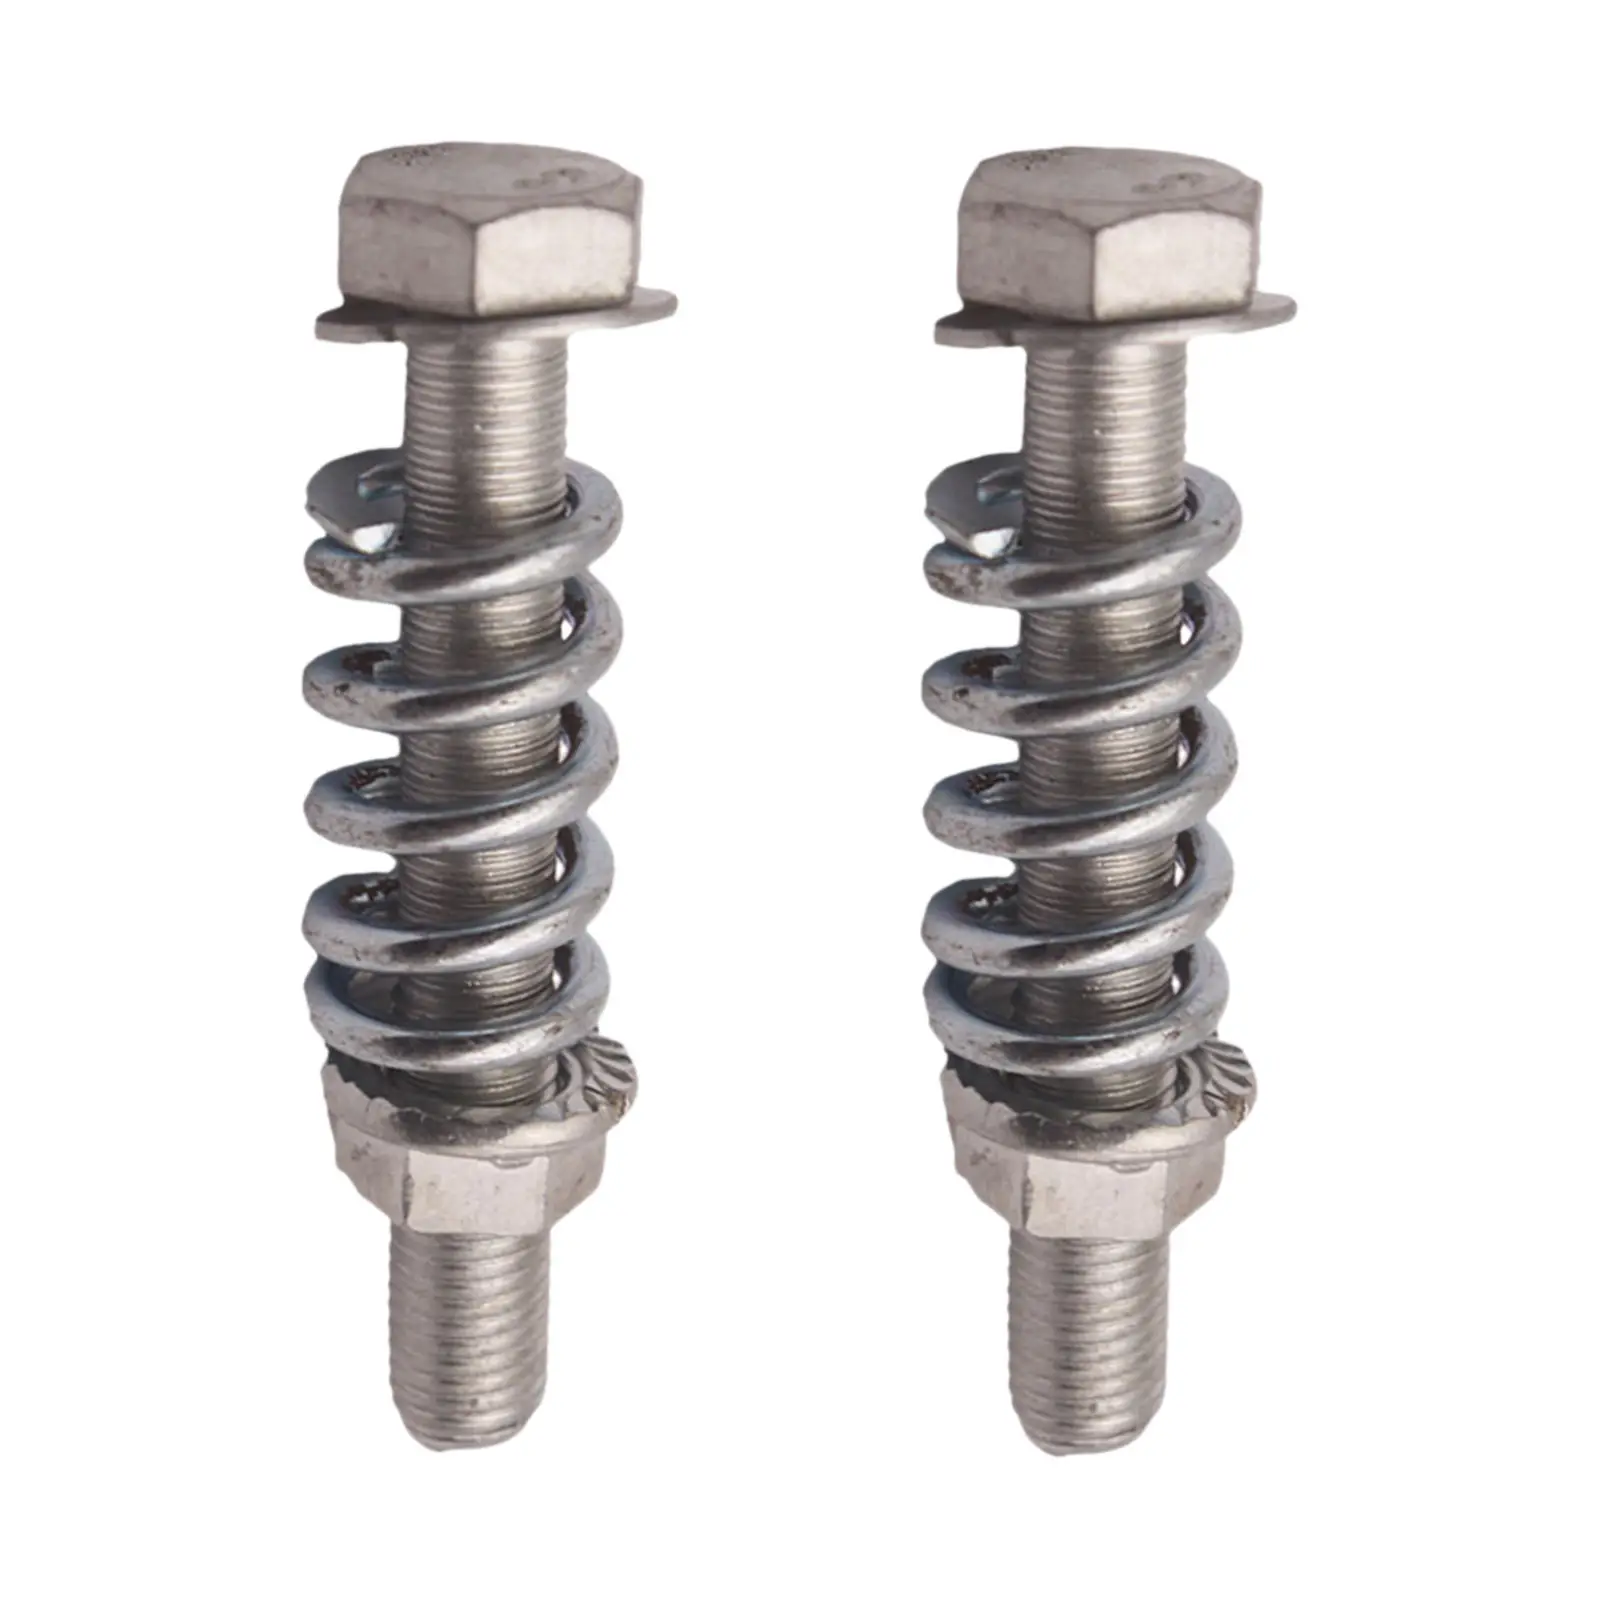 2Pcs M10x1.5 Exhaust Bolt Spring Stud Hardware Kit Replacement Accessories